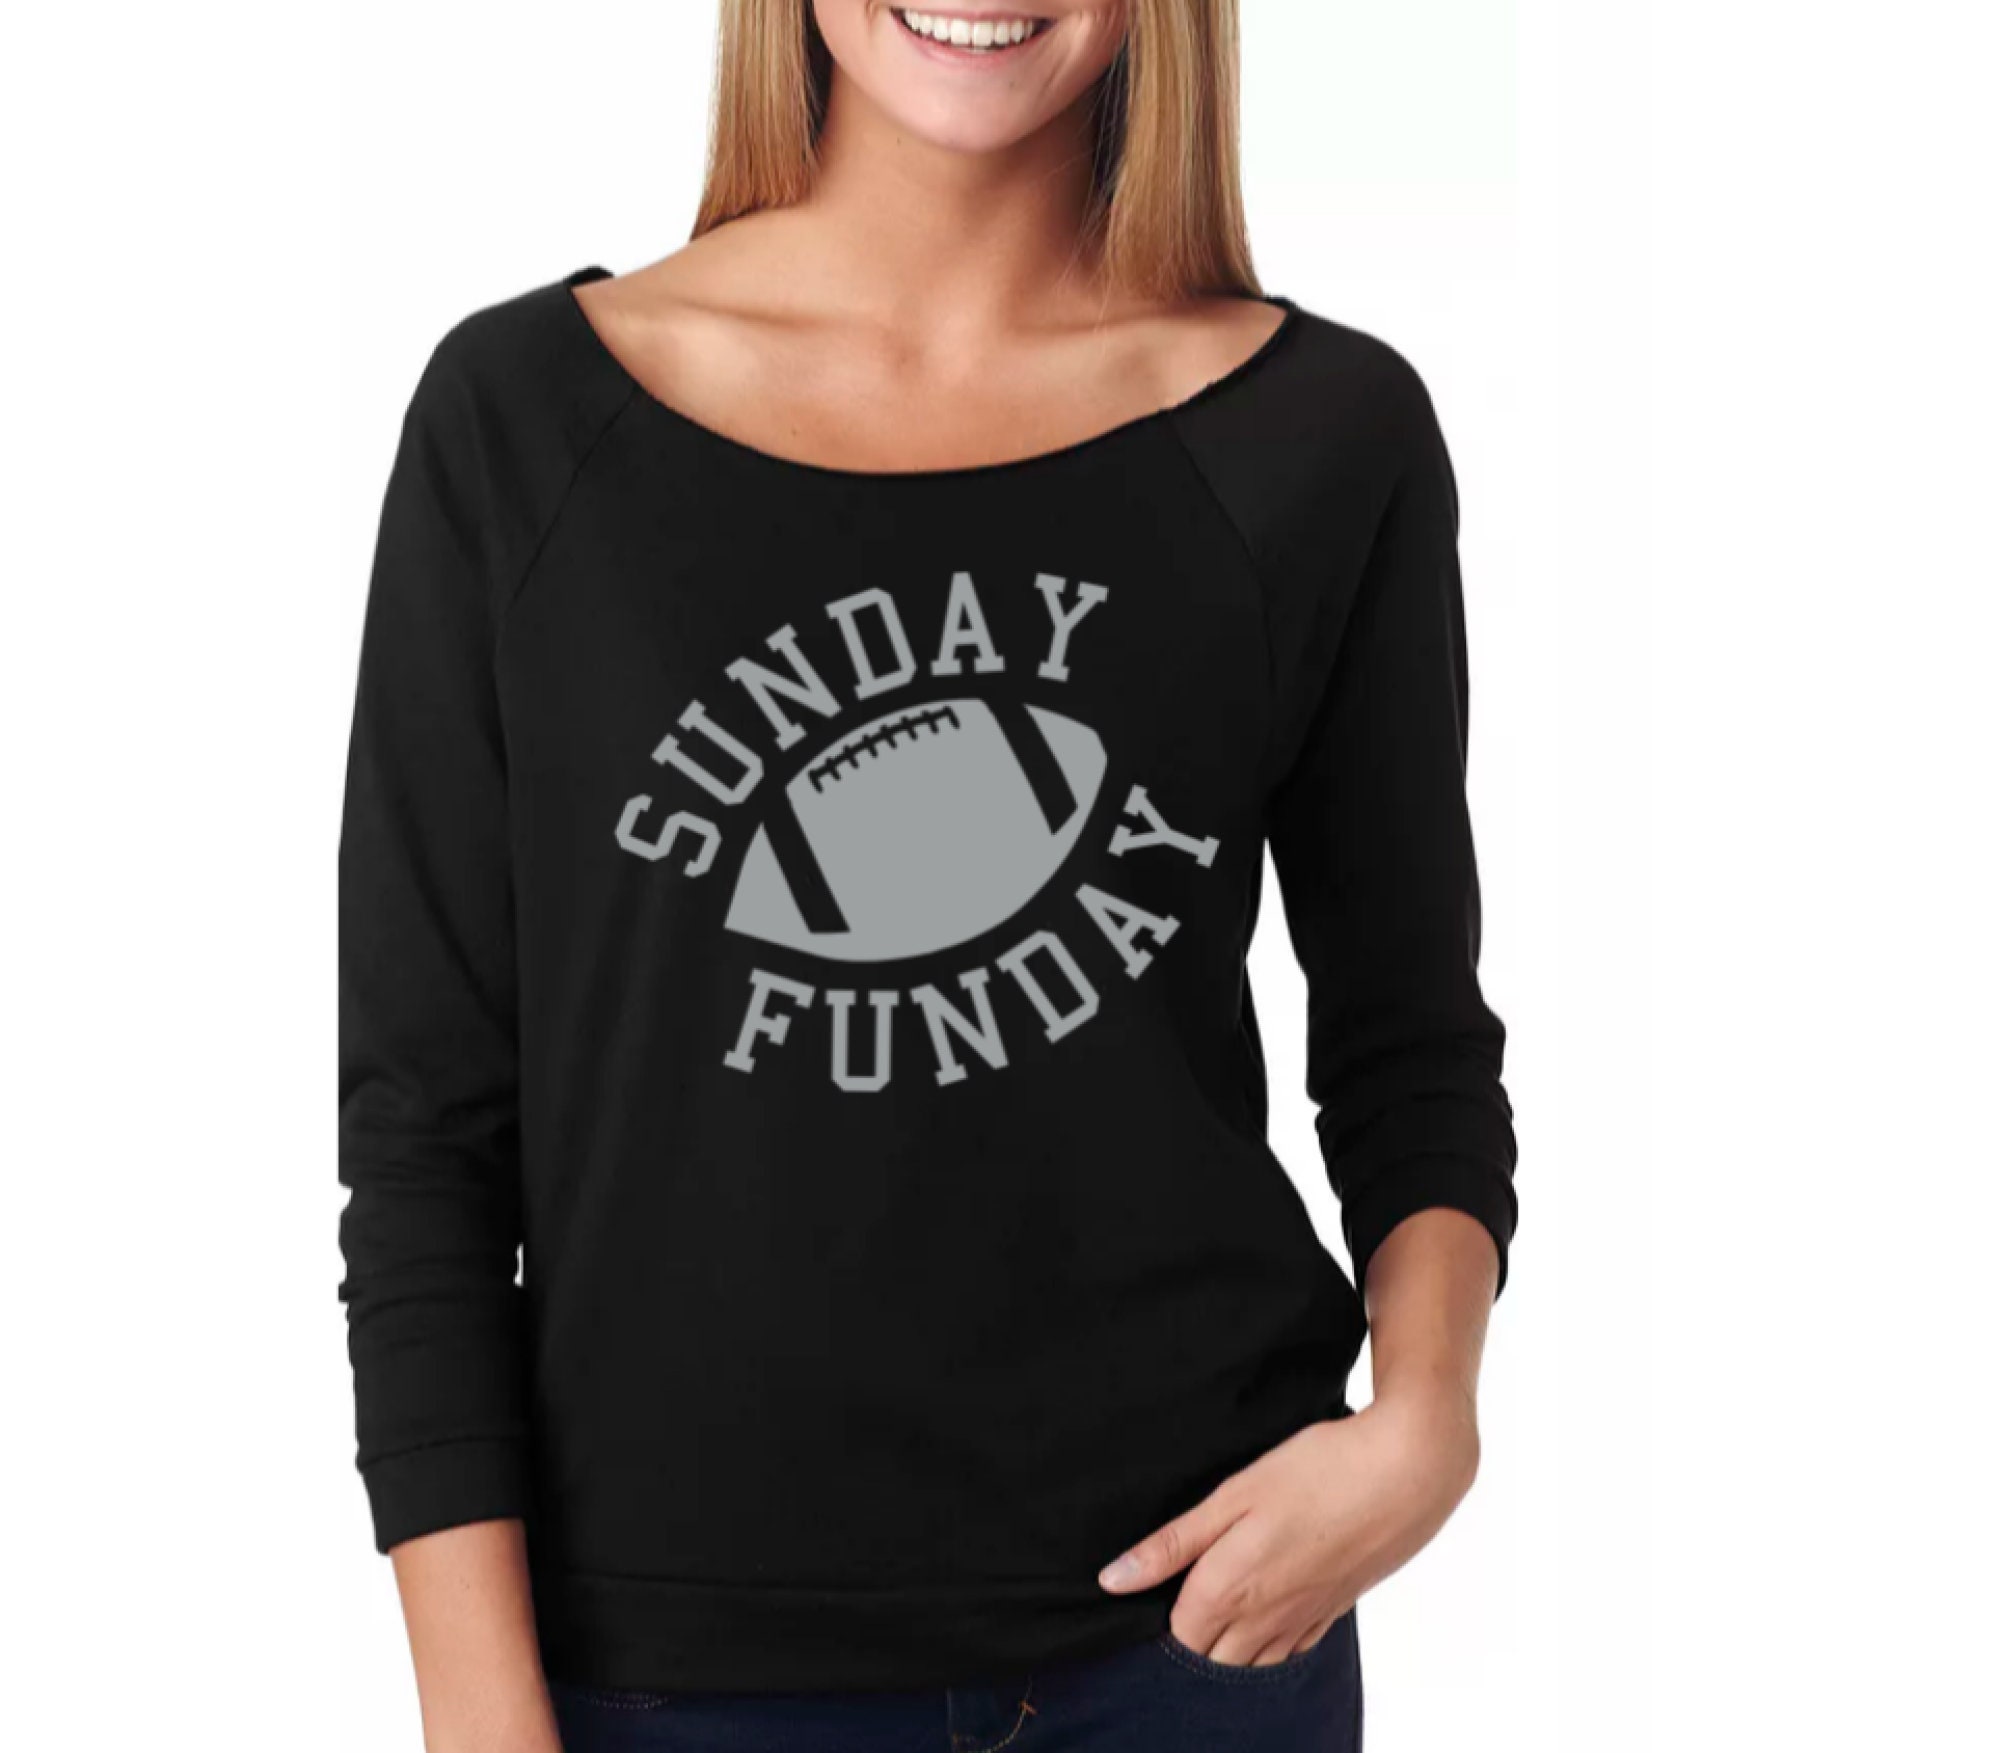 Off the Shoulder Sunday Funday Sweatshirts Football is the | Etsy